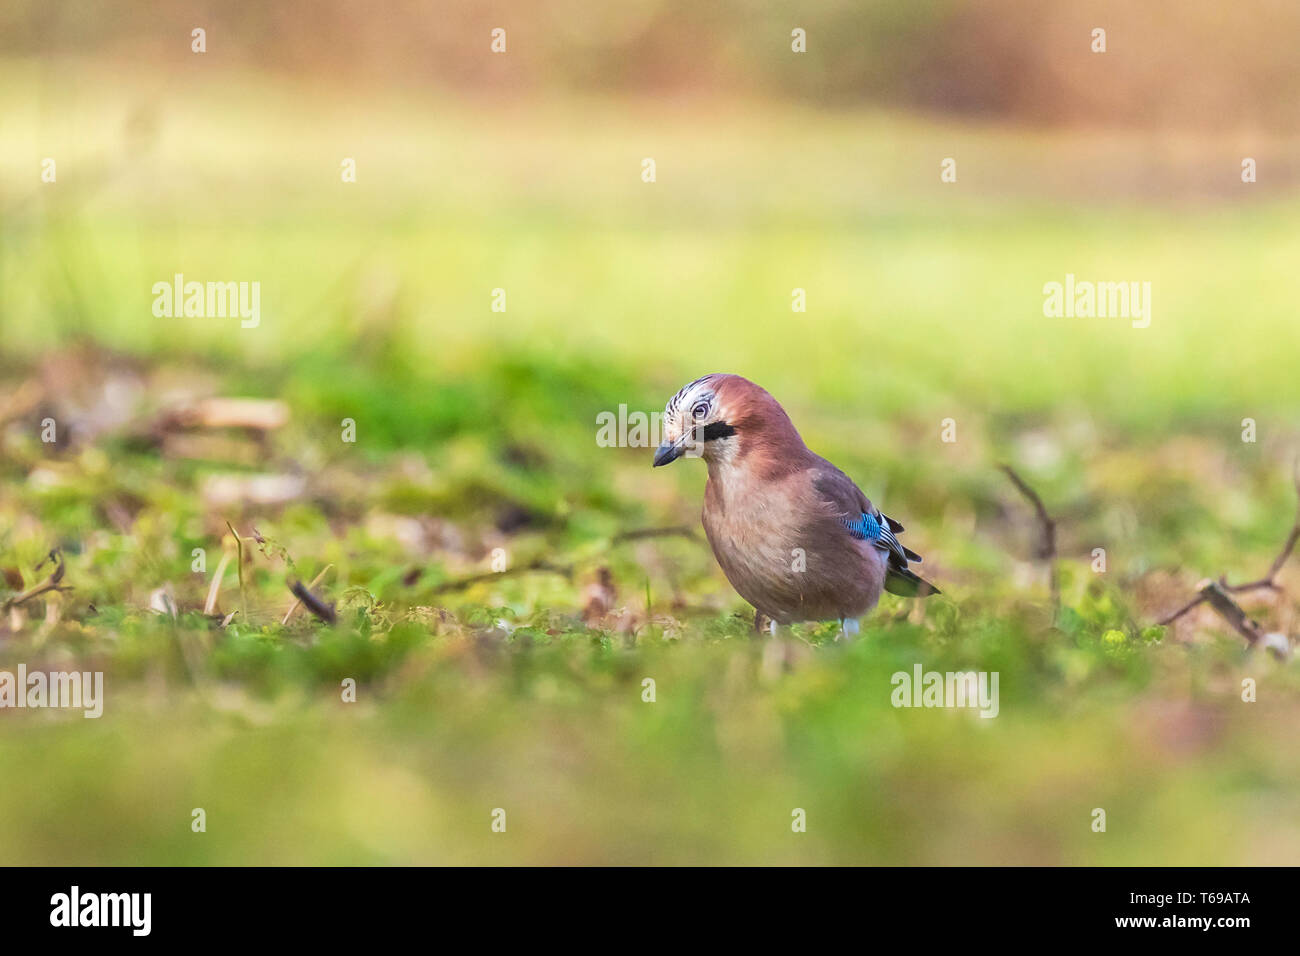 Eurasian jay bird Garrulus glandarius searching in a meadow for insects to feed. Stock Photo